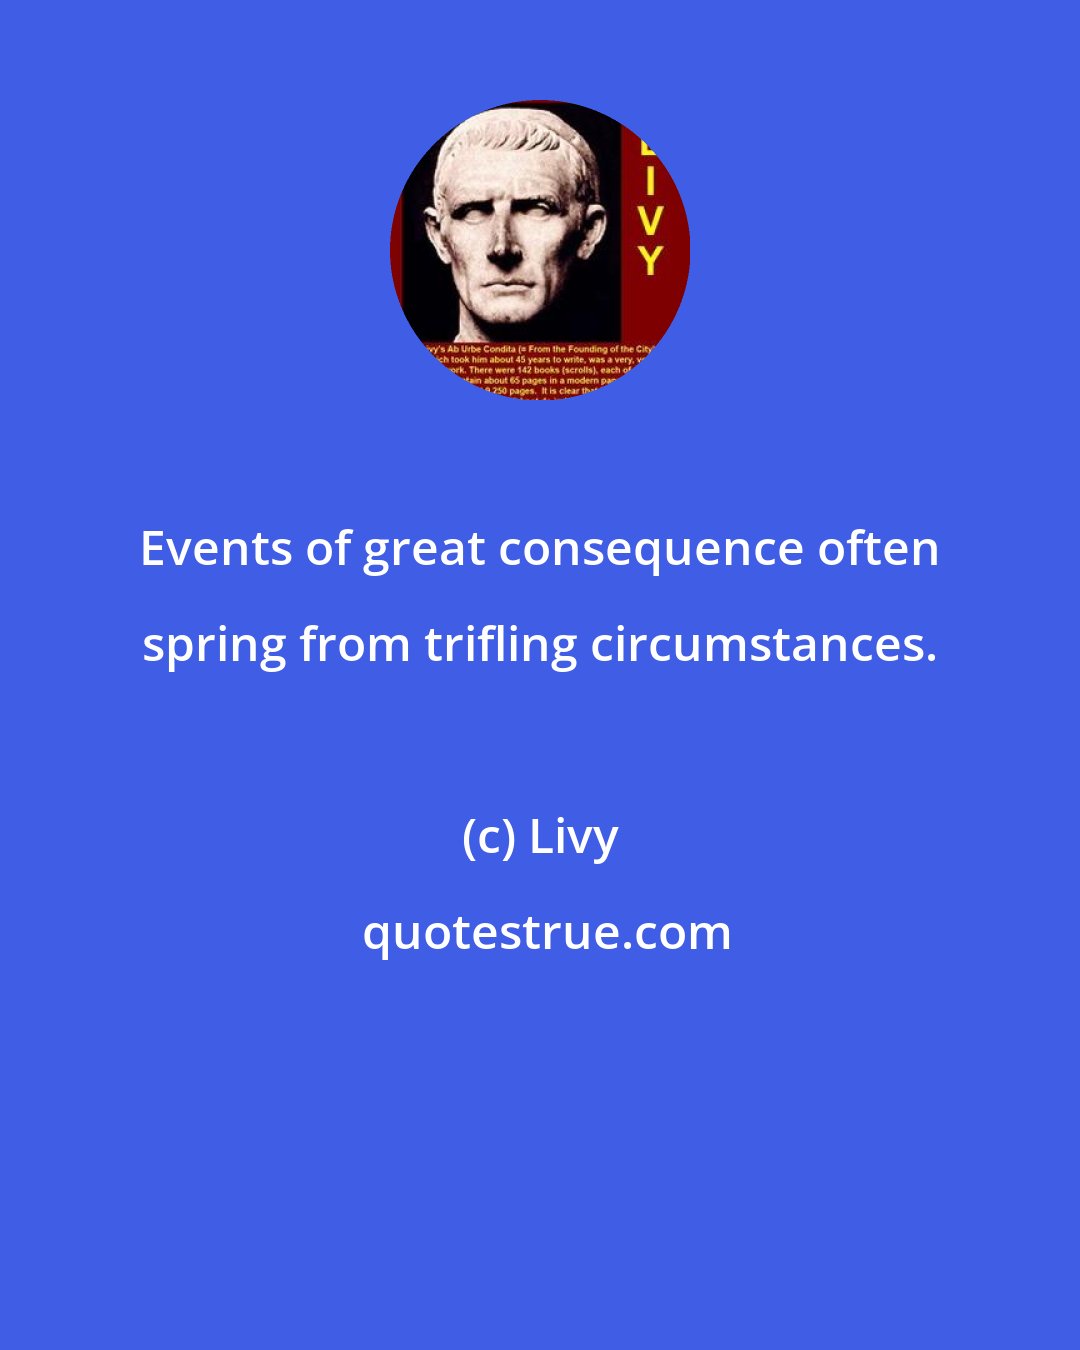 Livy: Events of great consequence often spring from trifling circumstances.